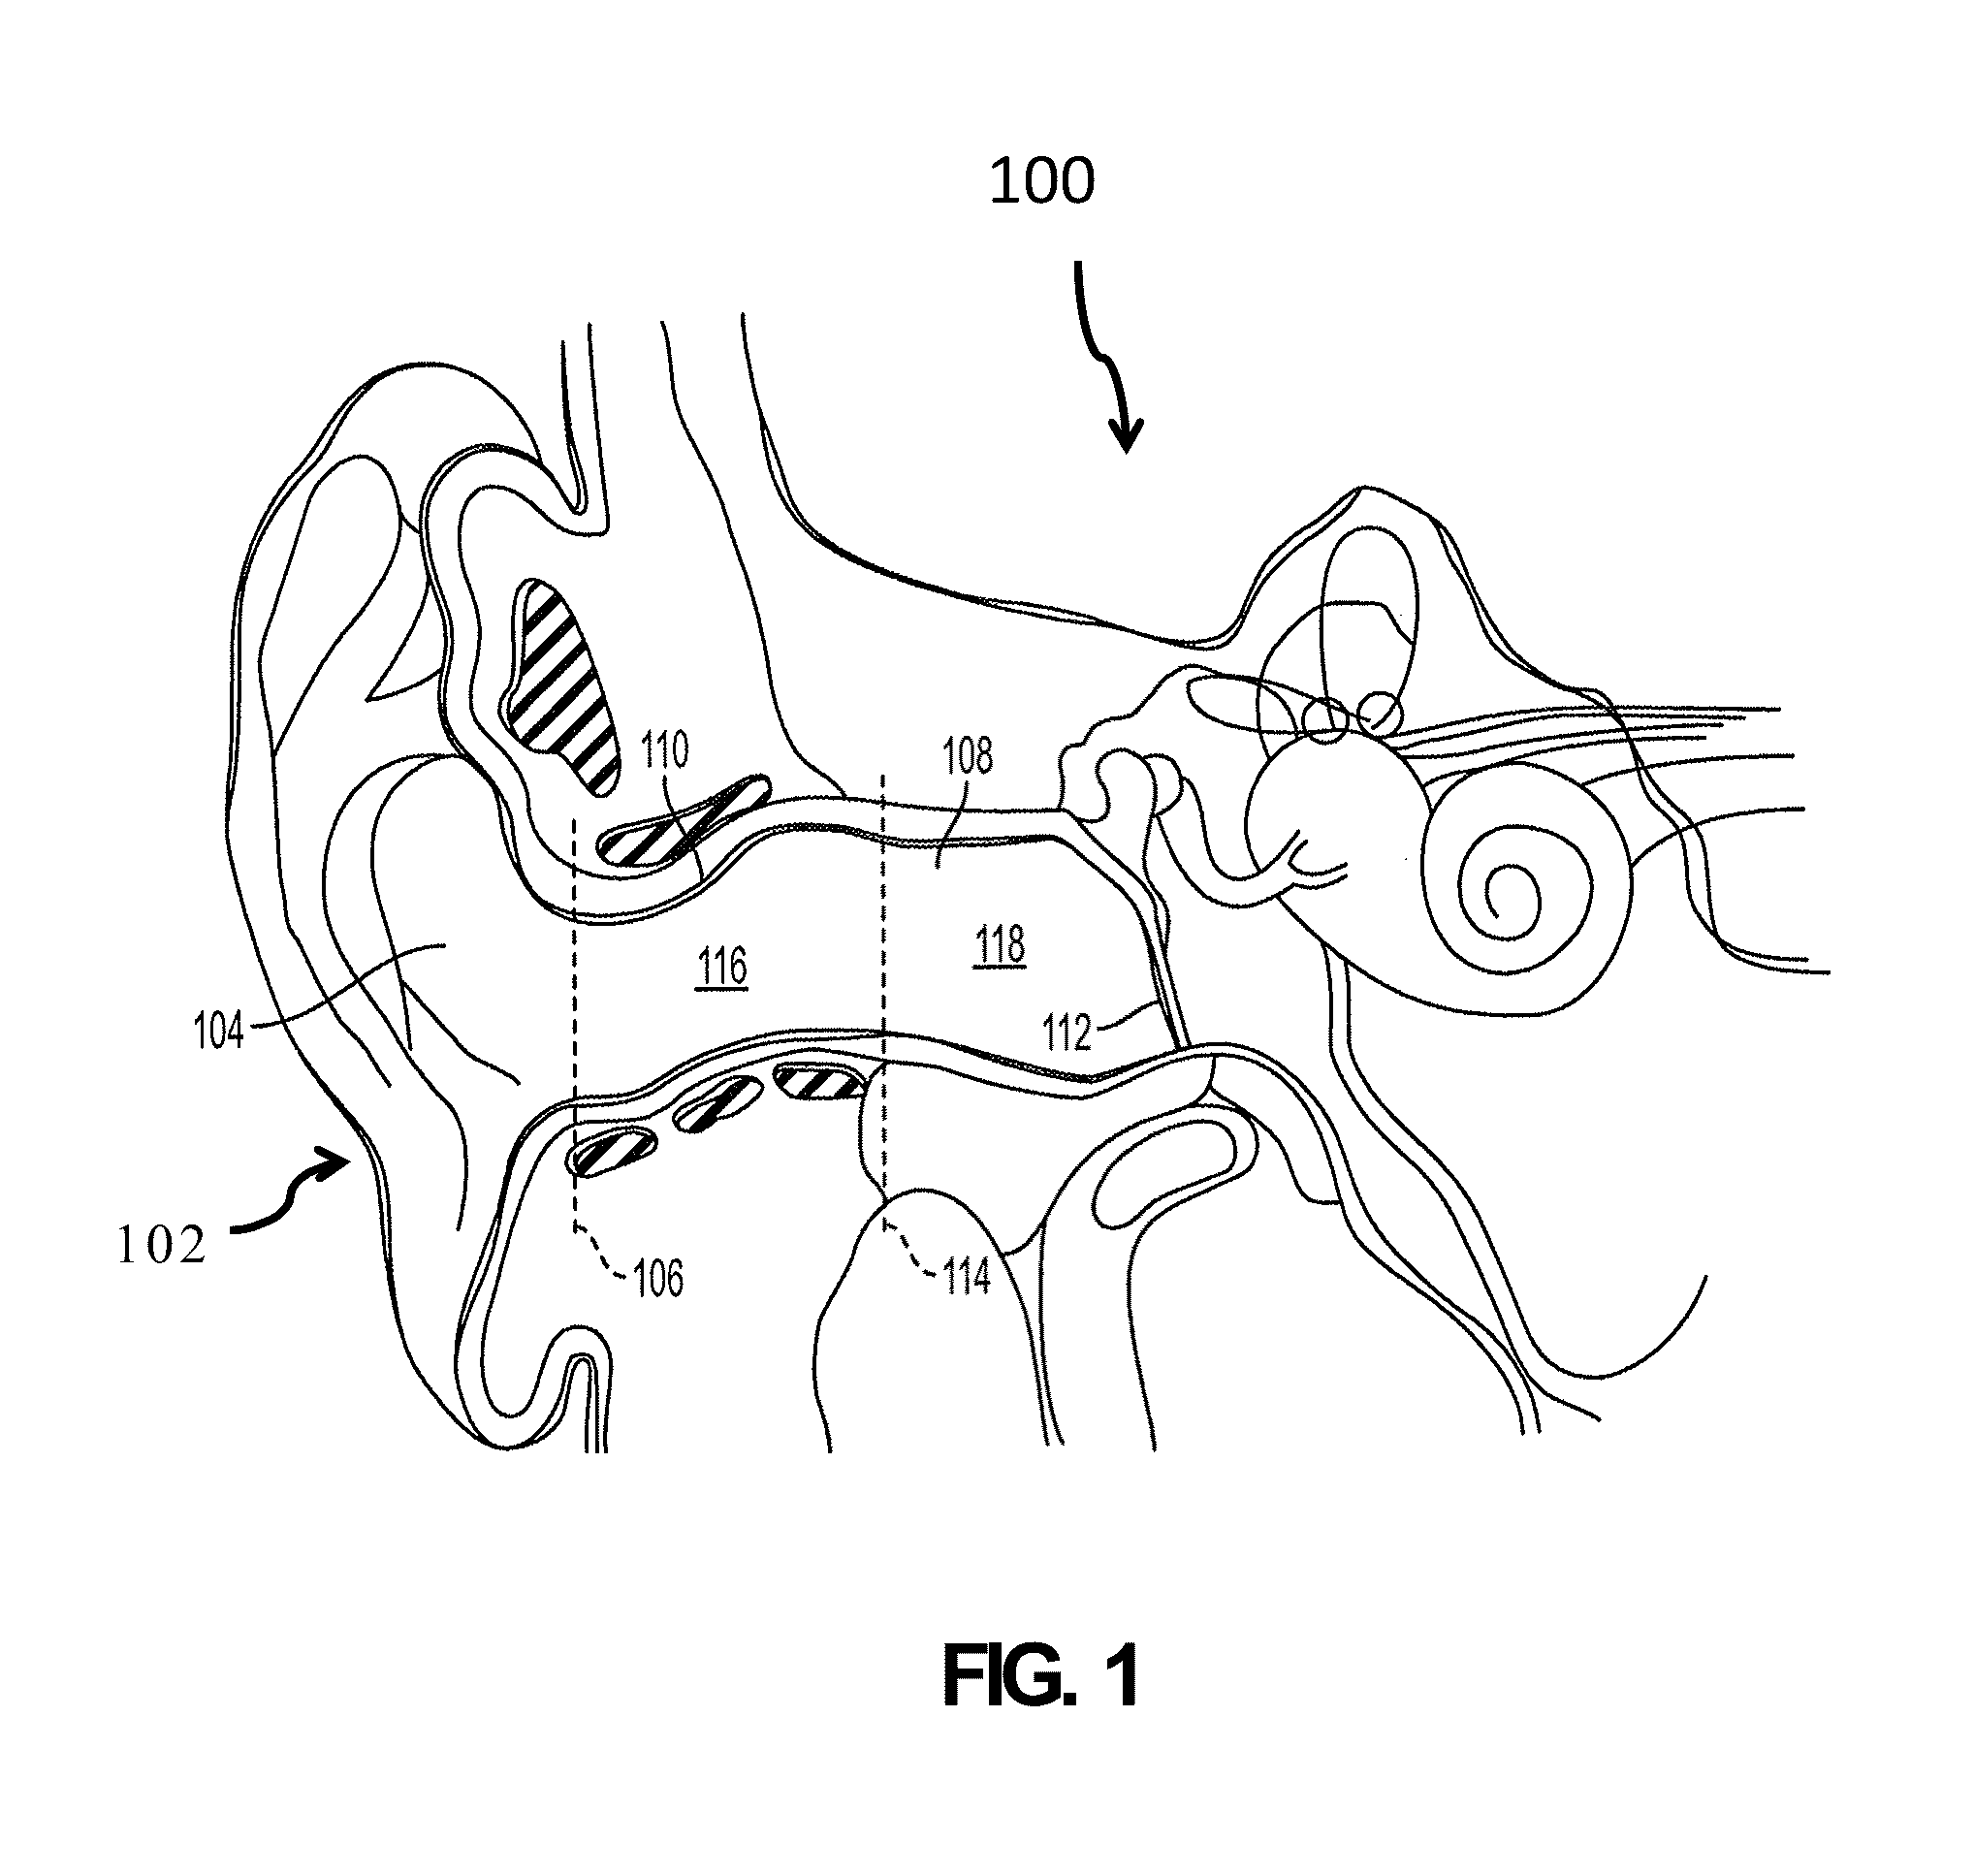 Methods and devices for attenuating sound in a conduit or chamber